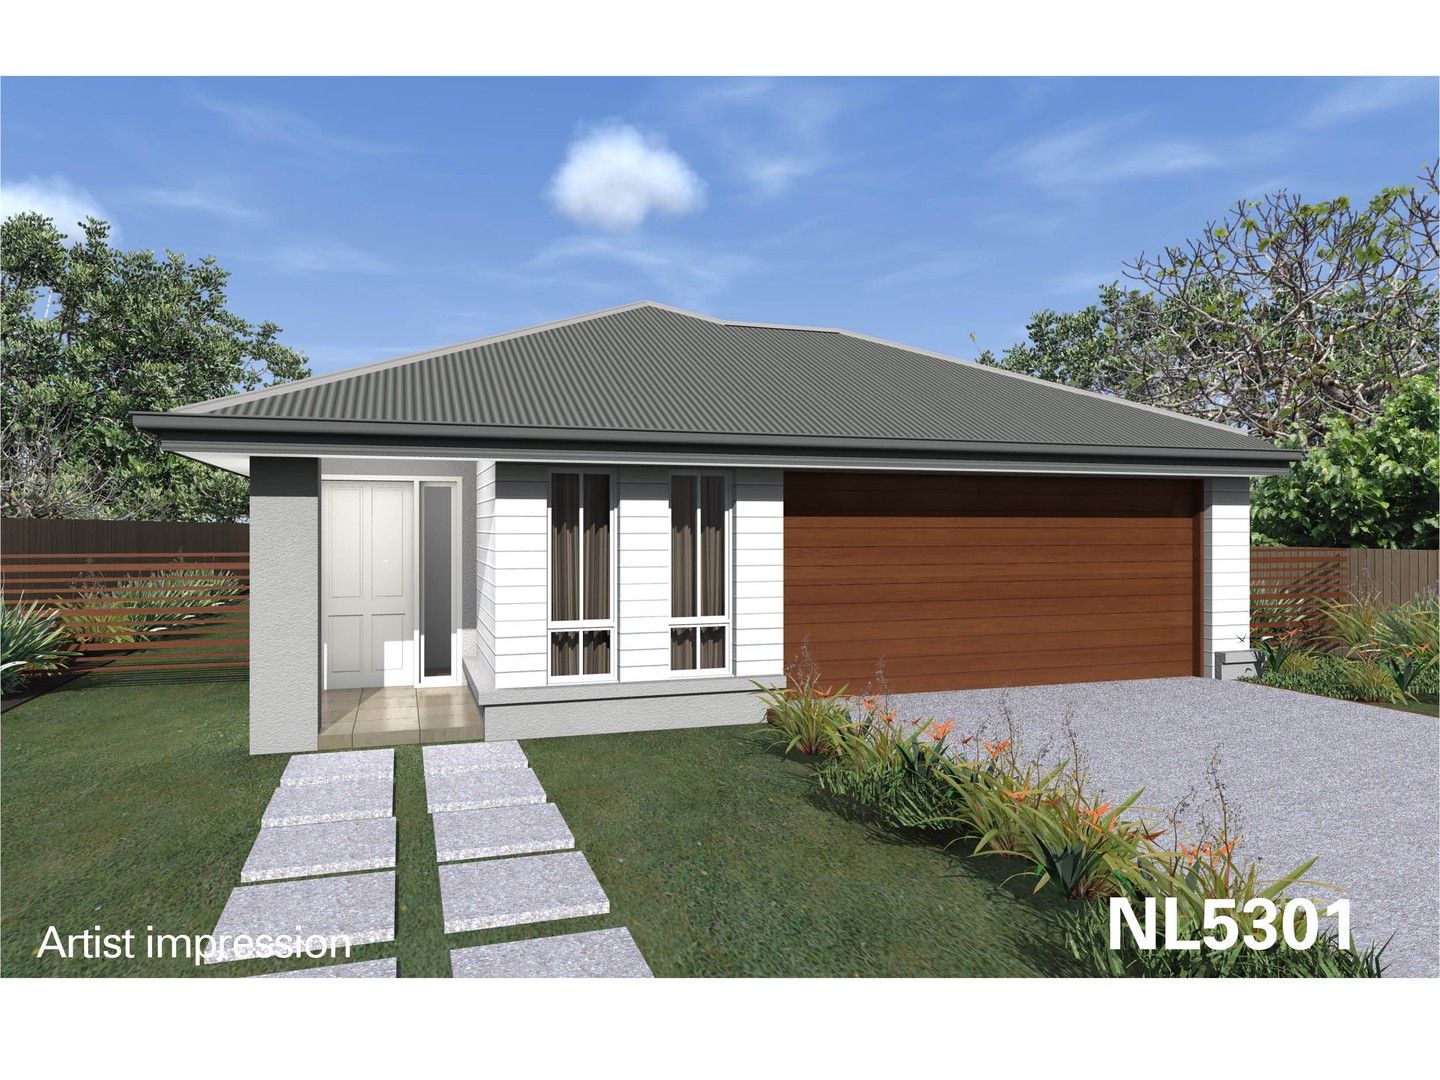 4 bedrooms New House & Land in Lot 1 Cloverdale Rd DOOLANDELLA QLD, 4077